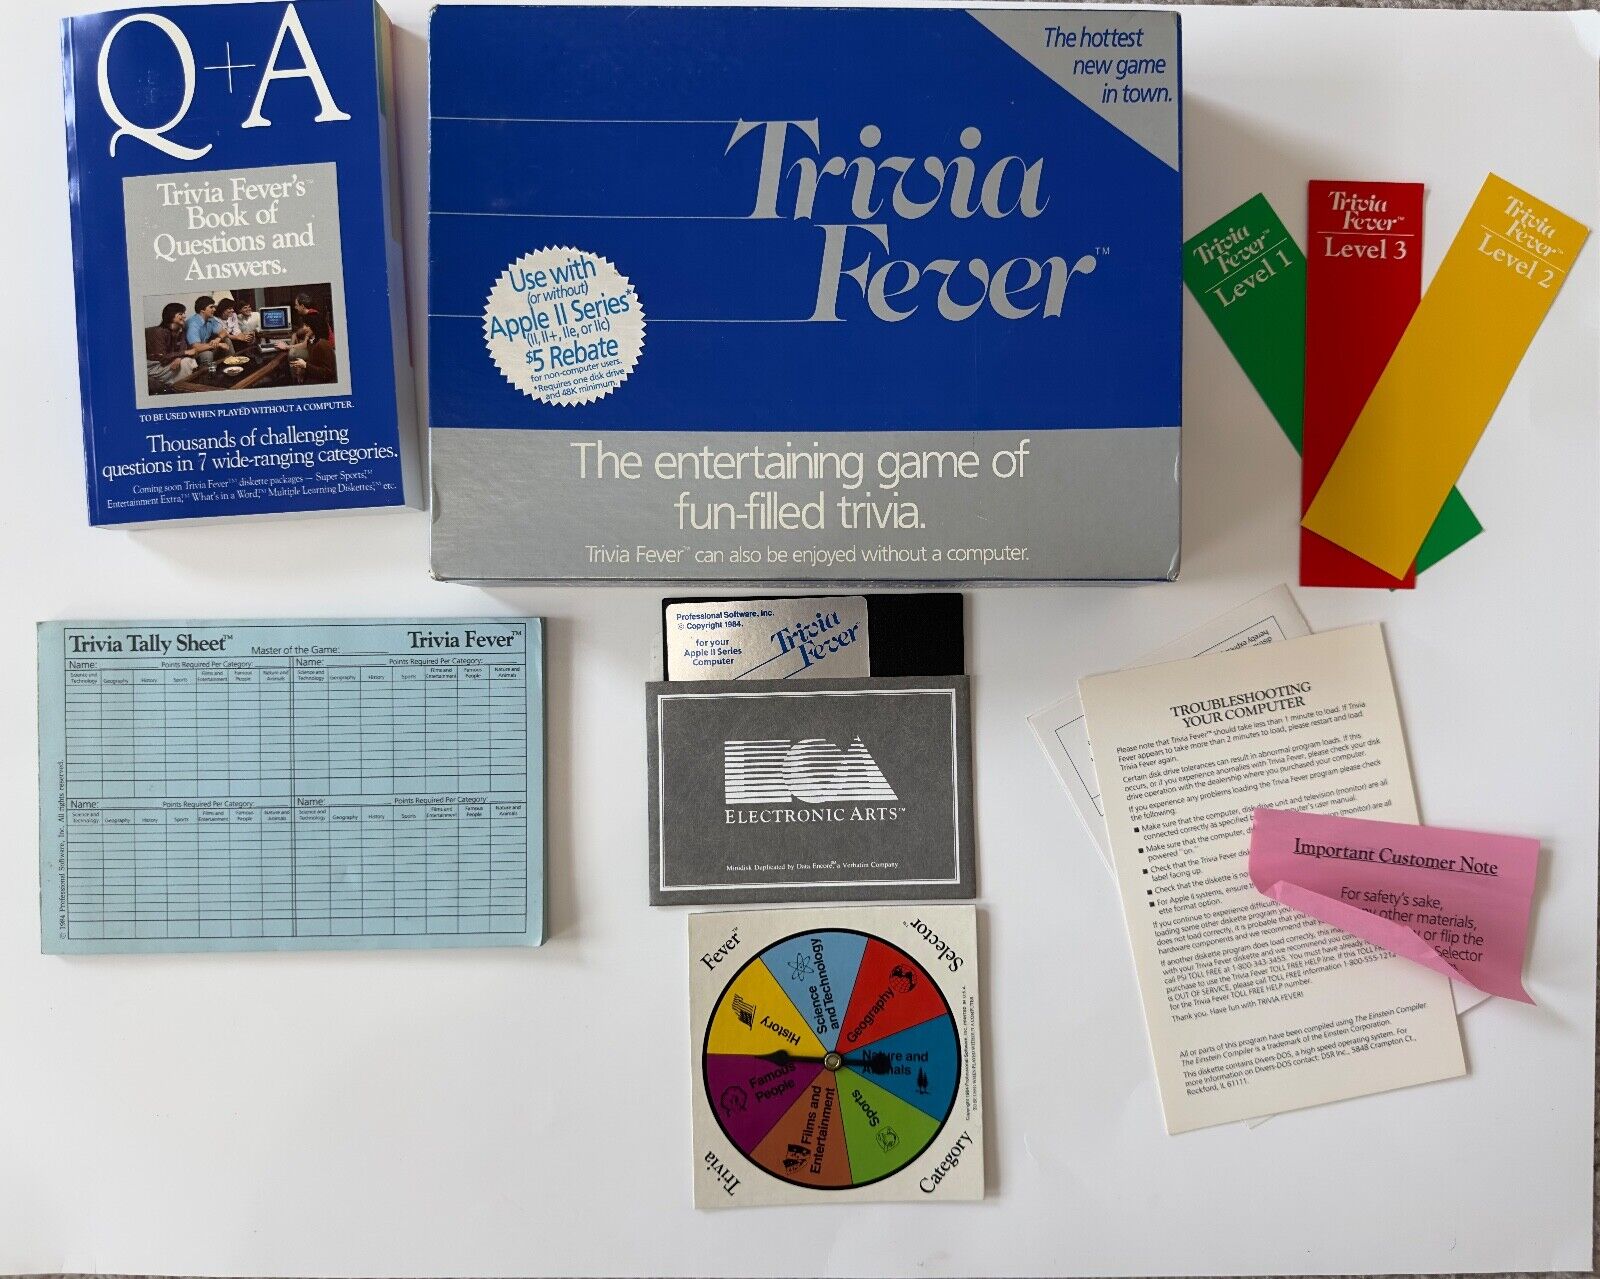 Trivia Fever Professional Software for Apple II Complete in Box 1984 Vintage